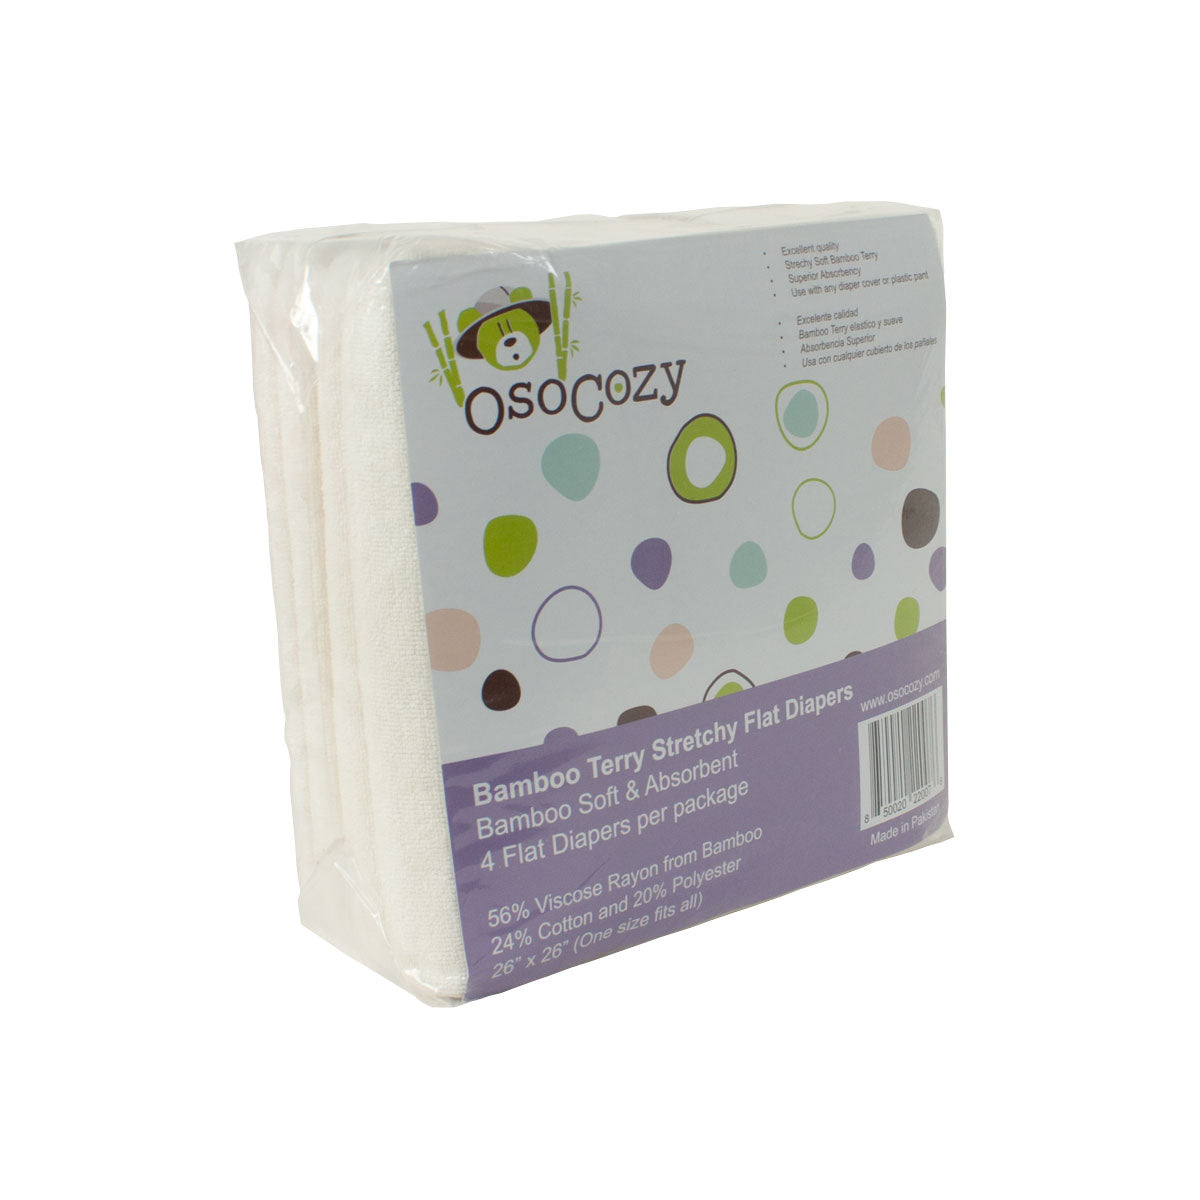 OsoCozy Bamboo Terry Stretchy Flat Diapers (4 pk)